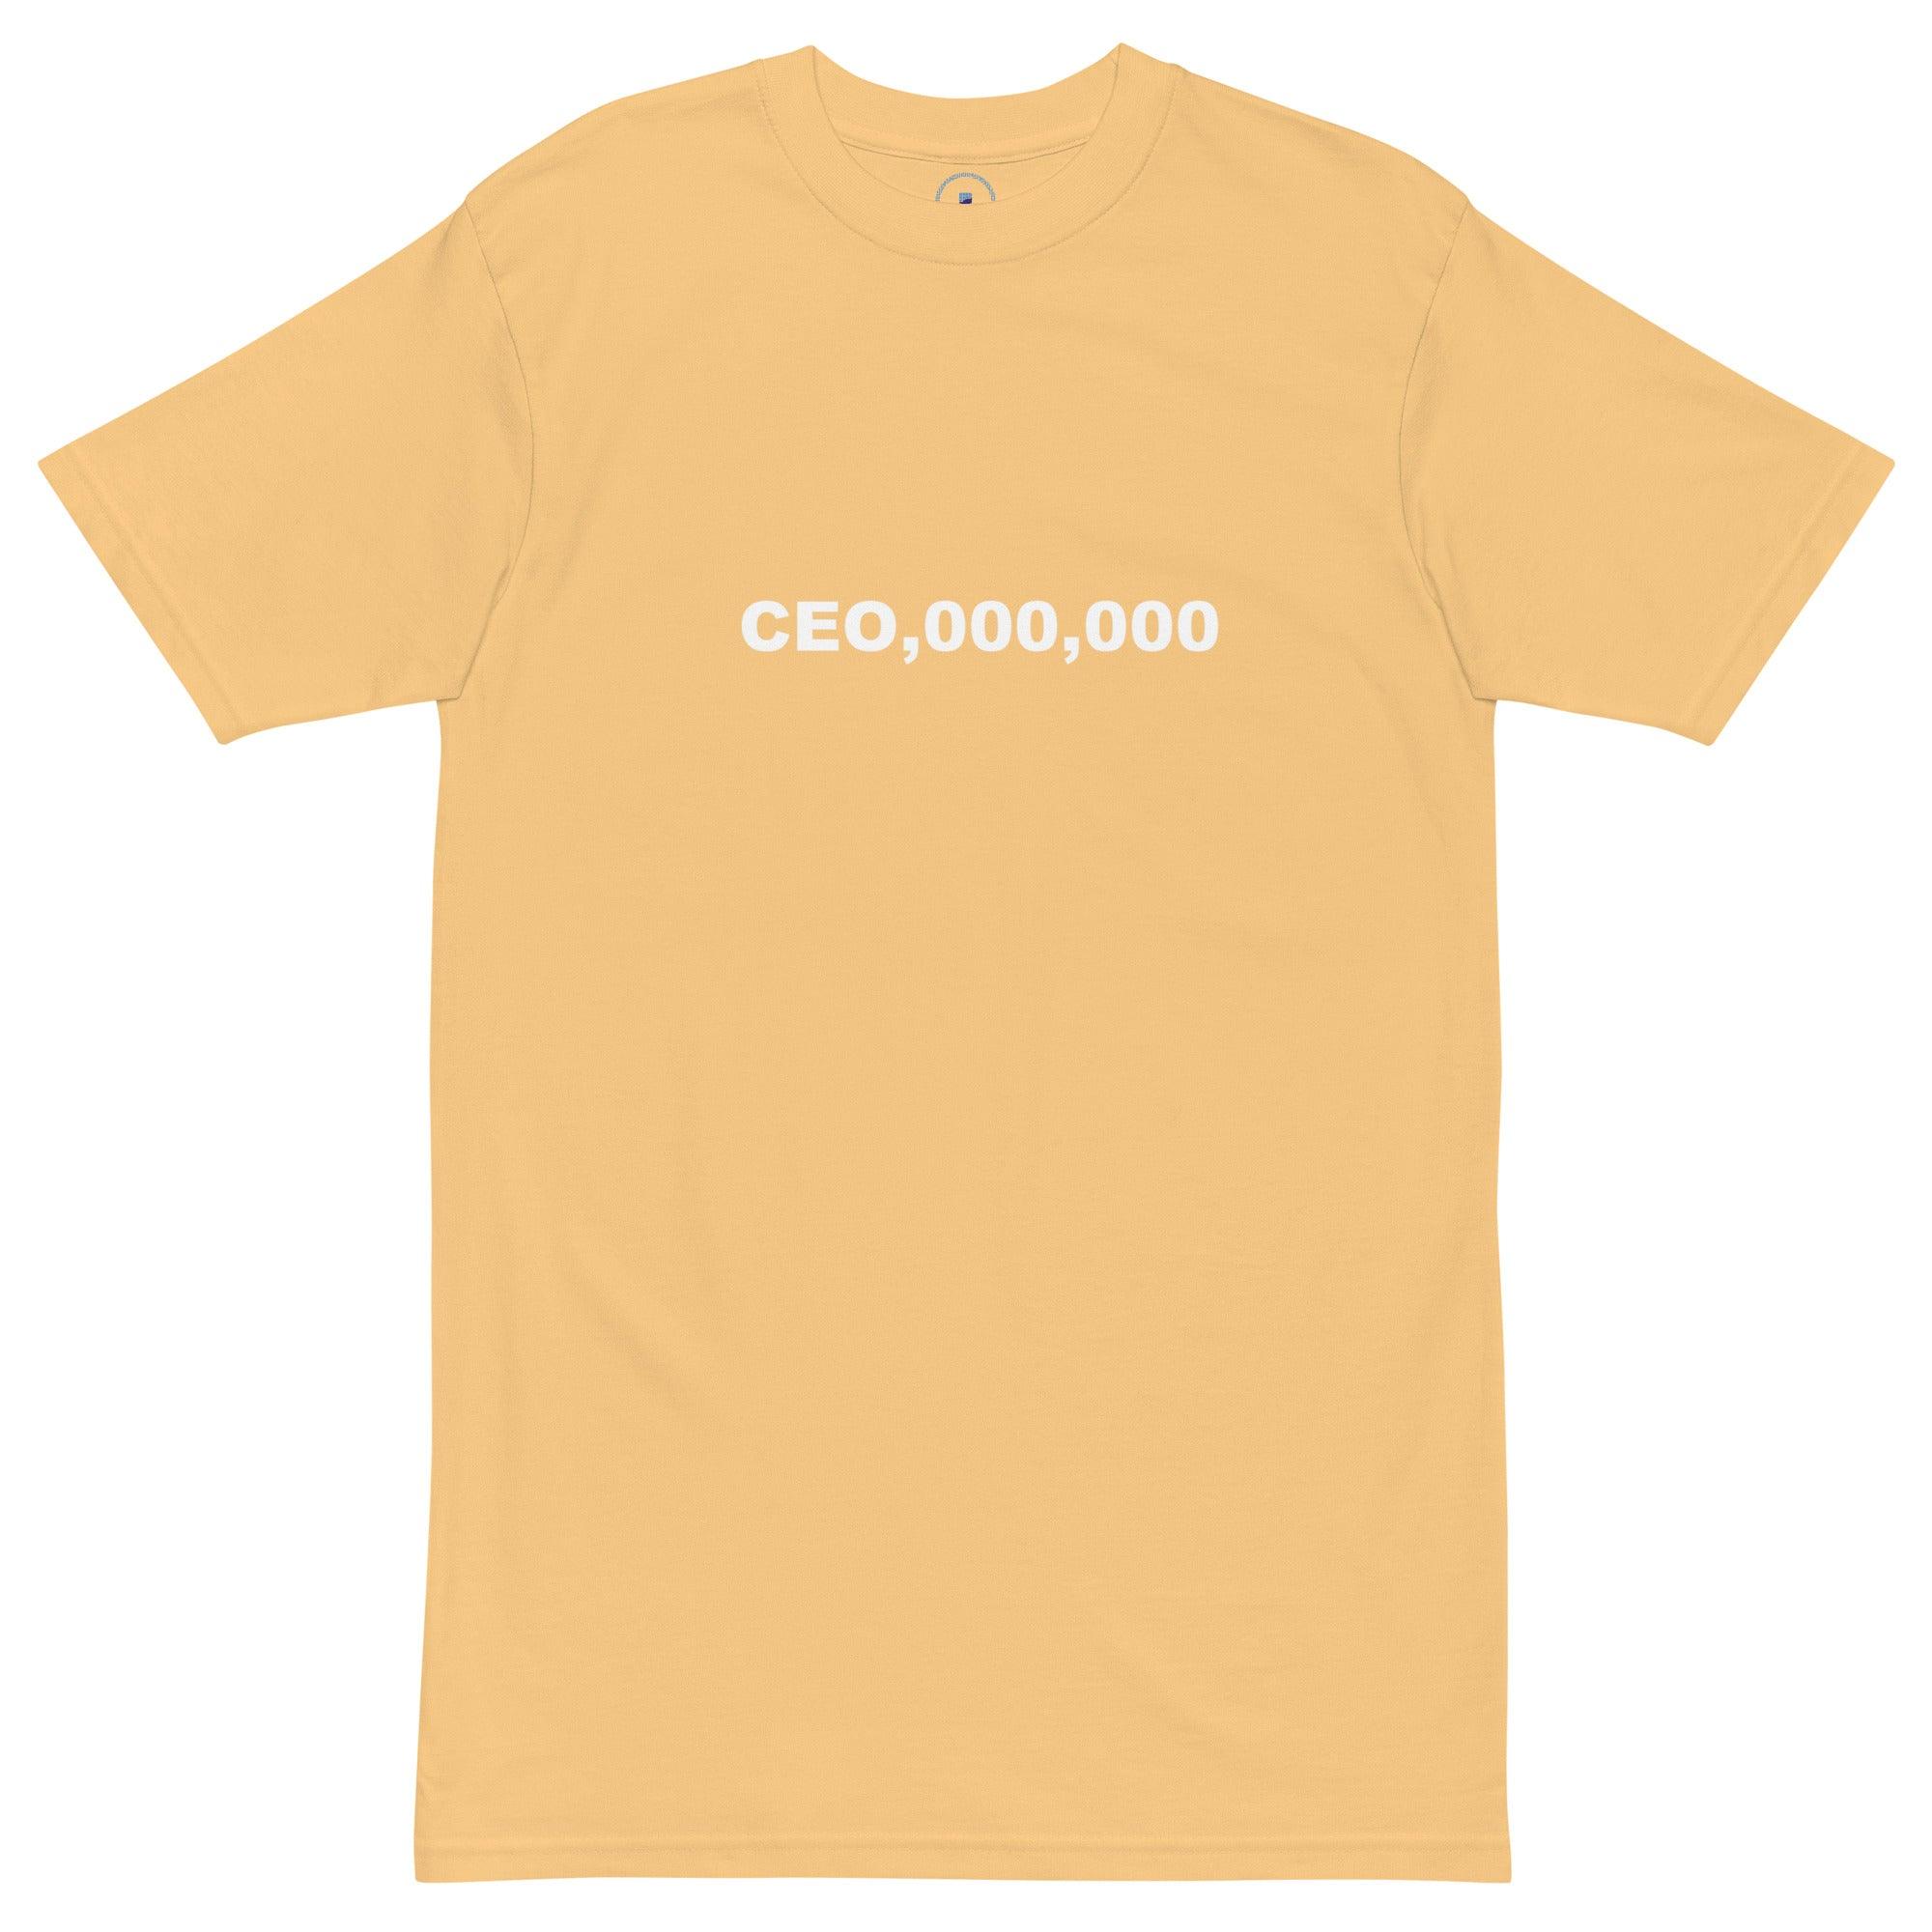 CEO,000,000-BLACK T-Shirt - InvestmenTees